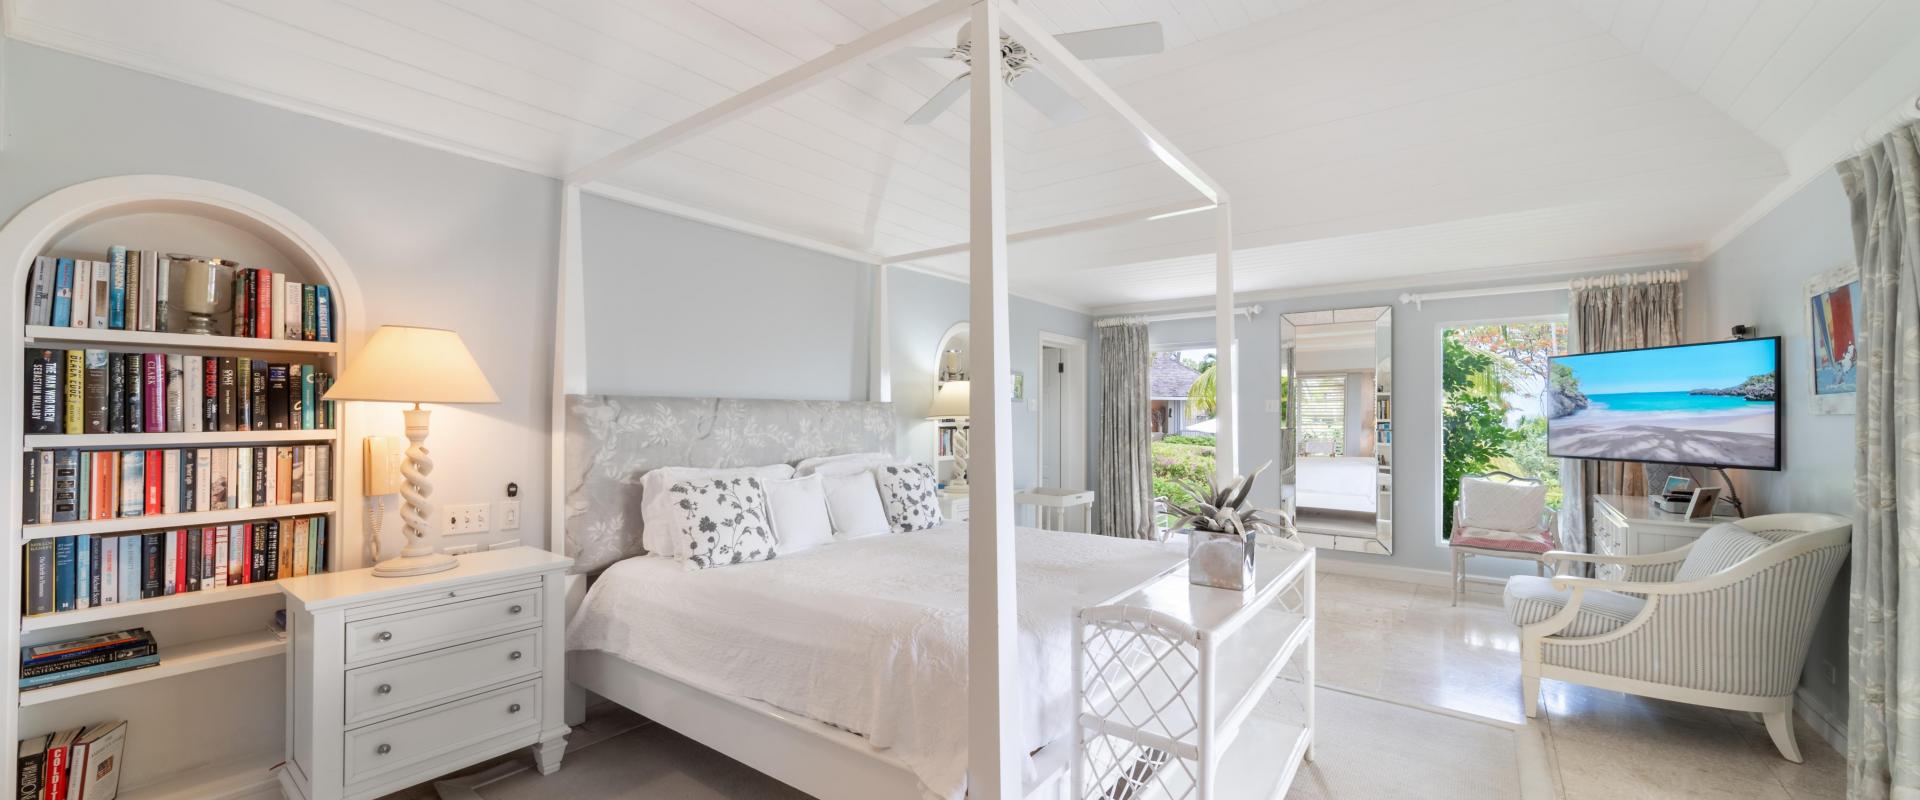 Point of View Holiday Rental In Sandy Lane Barbados Master Bedroom with Four Poster Bed and TV